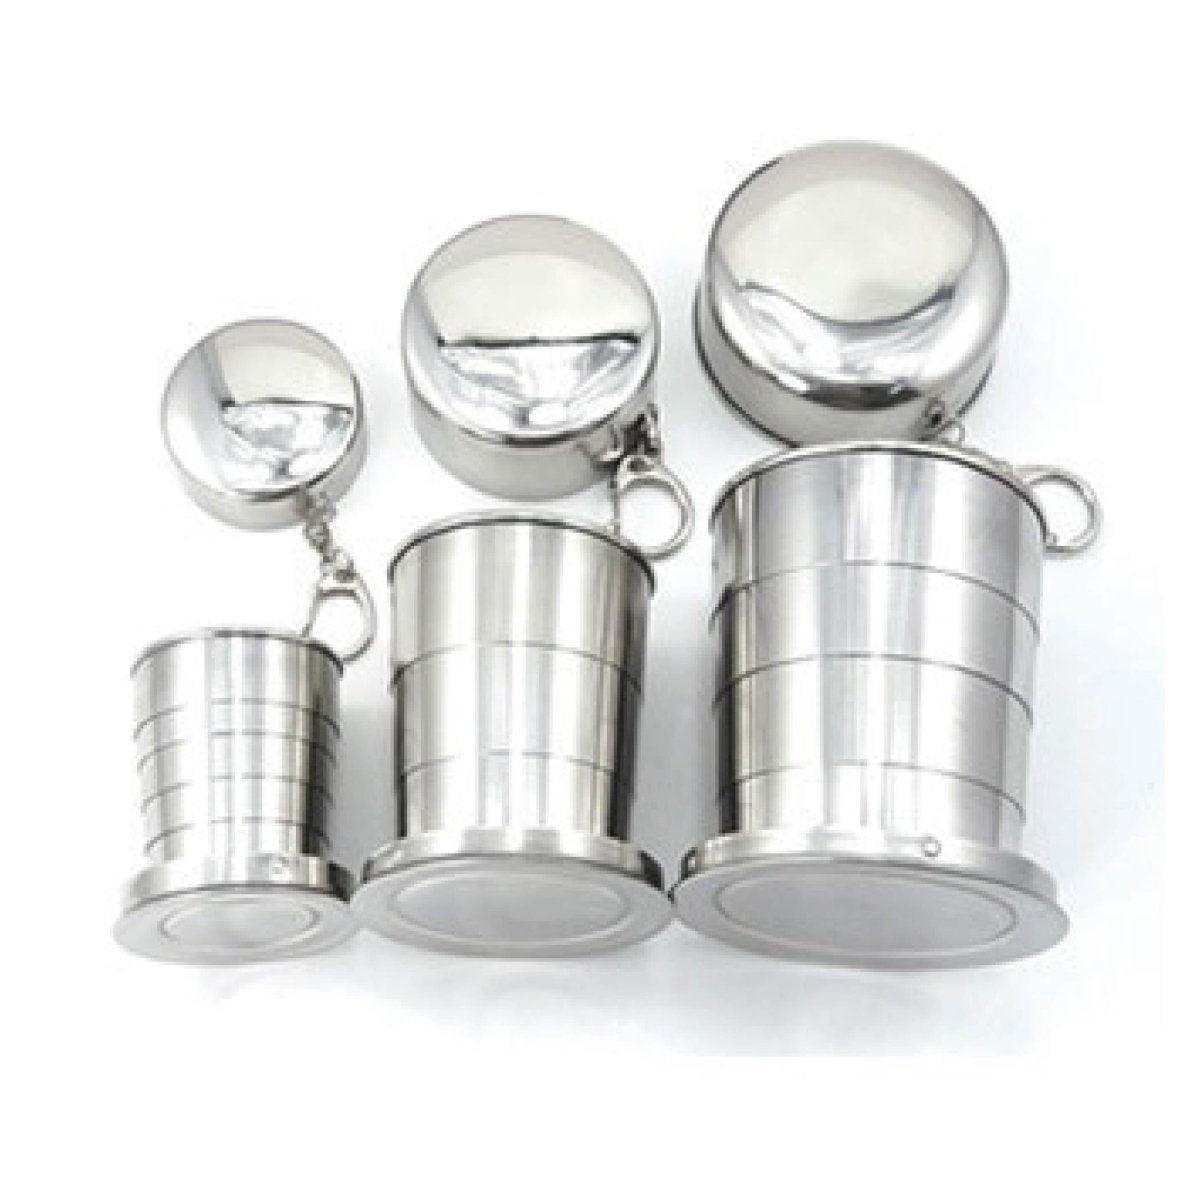 Stainless Steel Folding Telescopic Cup Food Grade Stainless Steel Environmental Cup Travel Supplies Outdoor Sports Portable Cup LI-000013 - CHL-STORE 